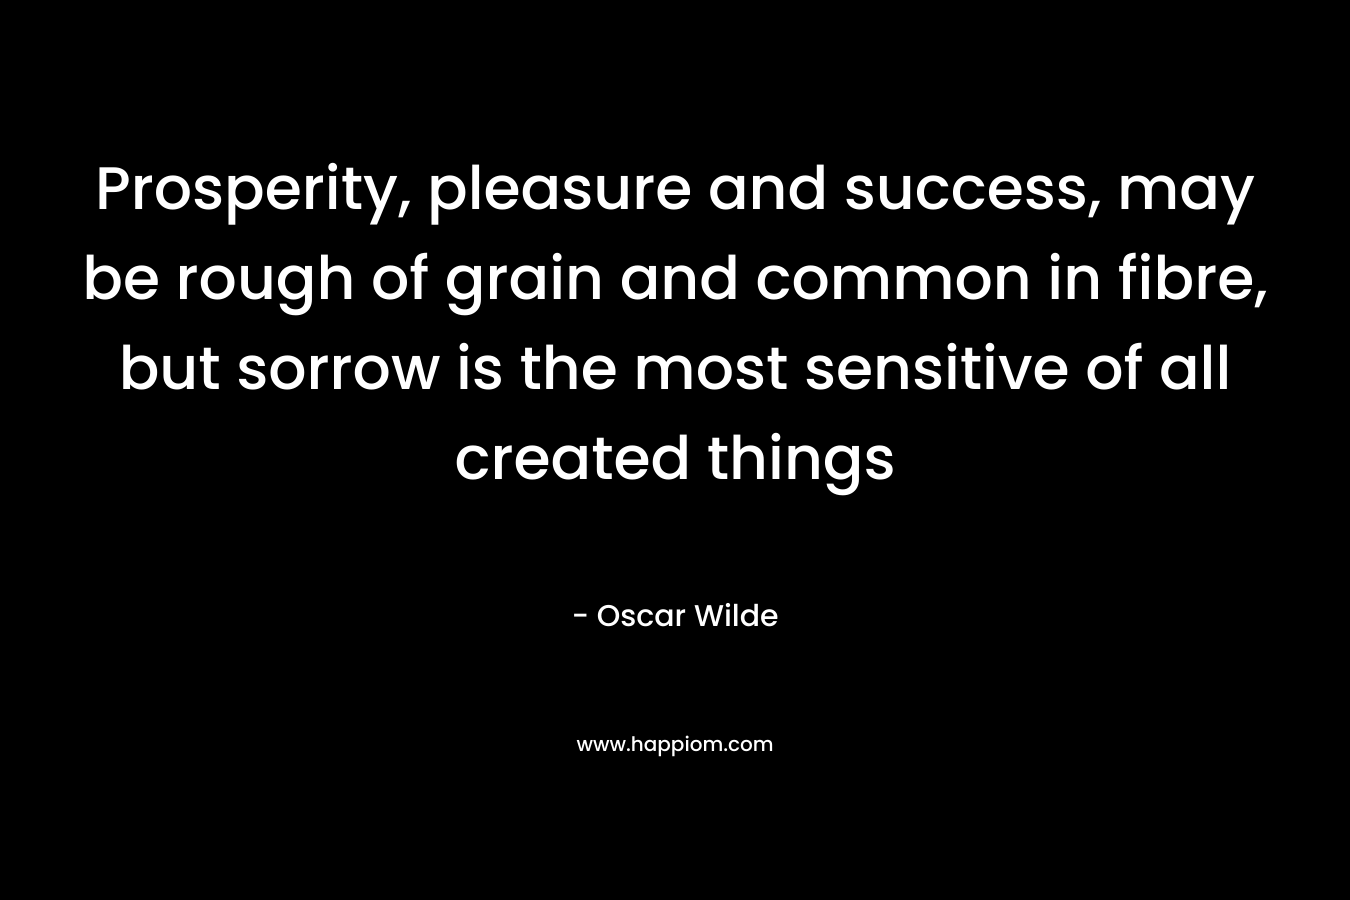 Prosperity, pleasure and success, may be rough of grain and common in fibre, but sorrow is the most sensitive of all created things – Oscar Wilde